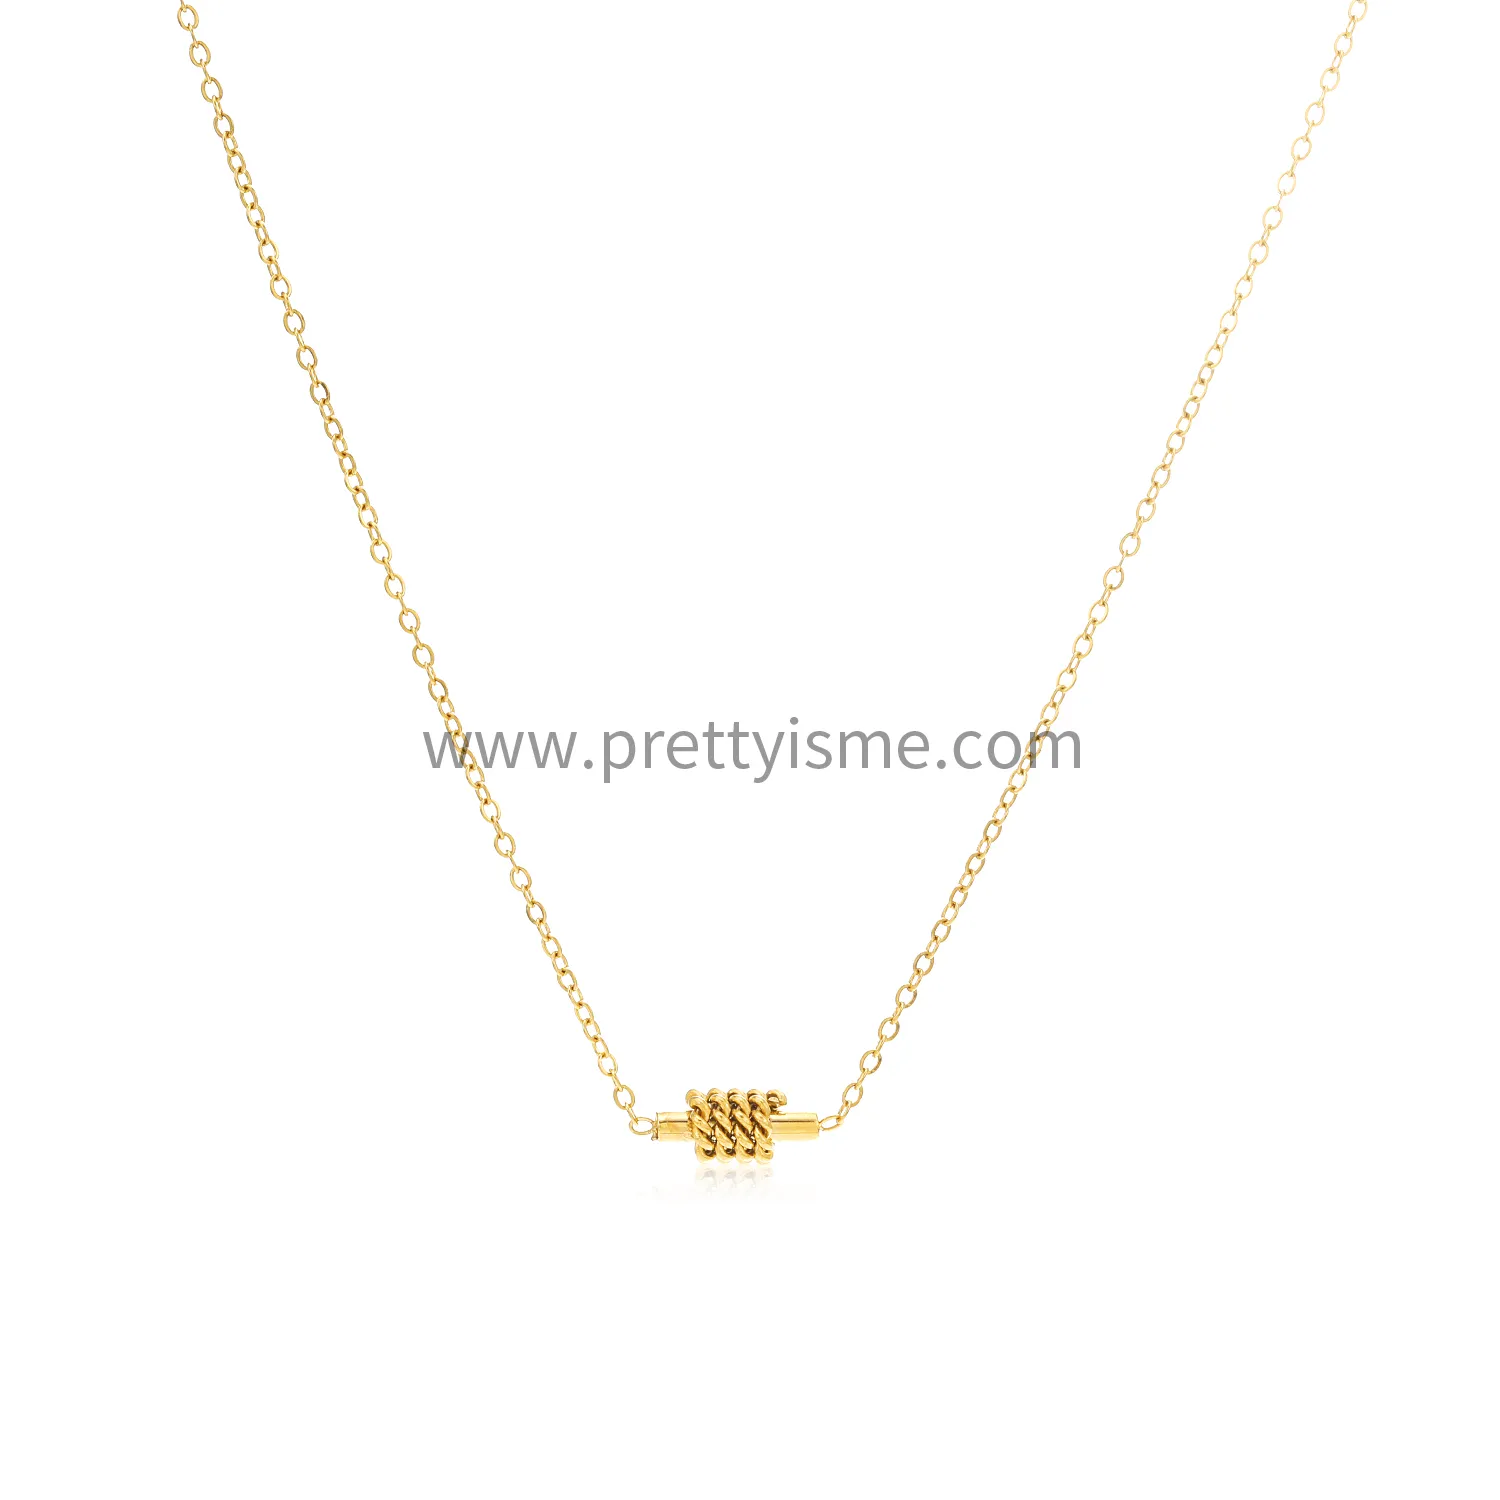 Minimalist Thin Stainless Steel 18k Gold Plated Necklace with Multiple Small Rings (5).webp